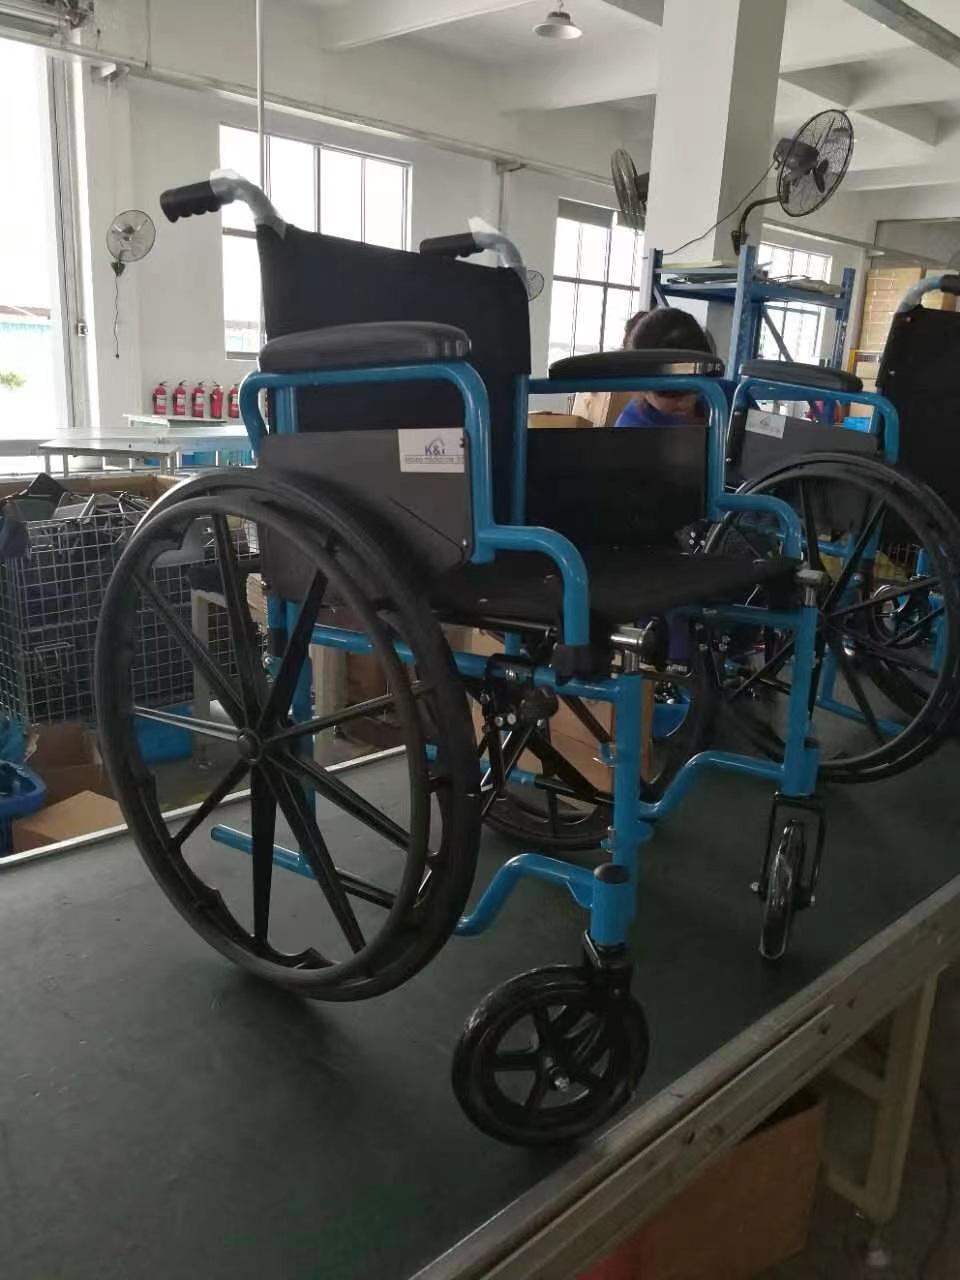 Hot Sale Luxurious Manual Wheel Chairs for Patient/Elderly